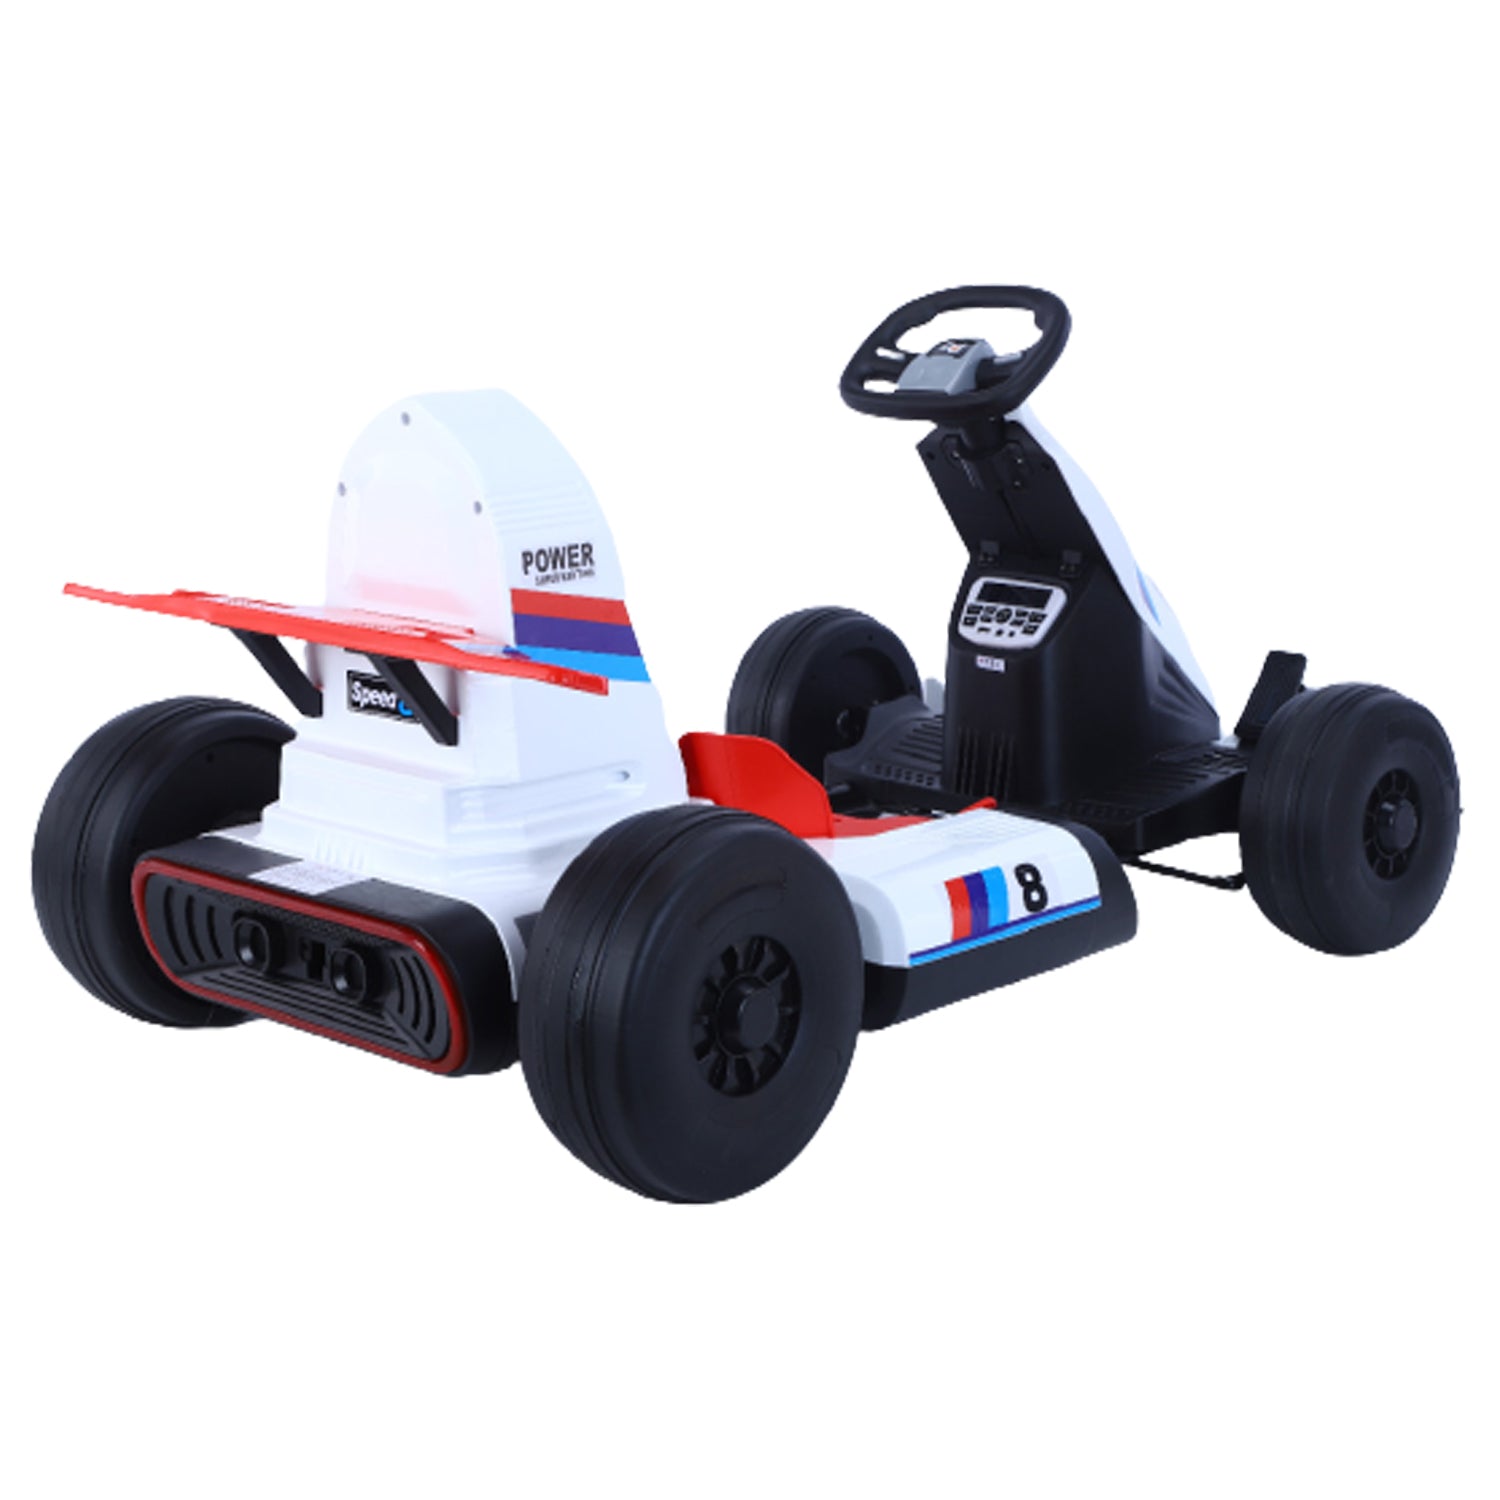 iRerts Electric Go Kart, Ride On Go Kart for Kids India